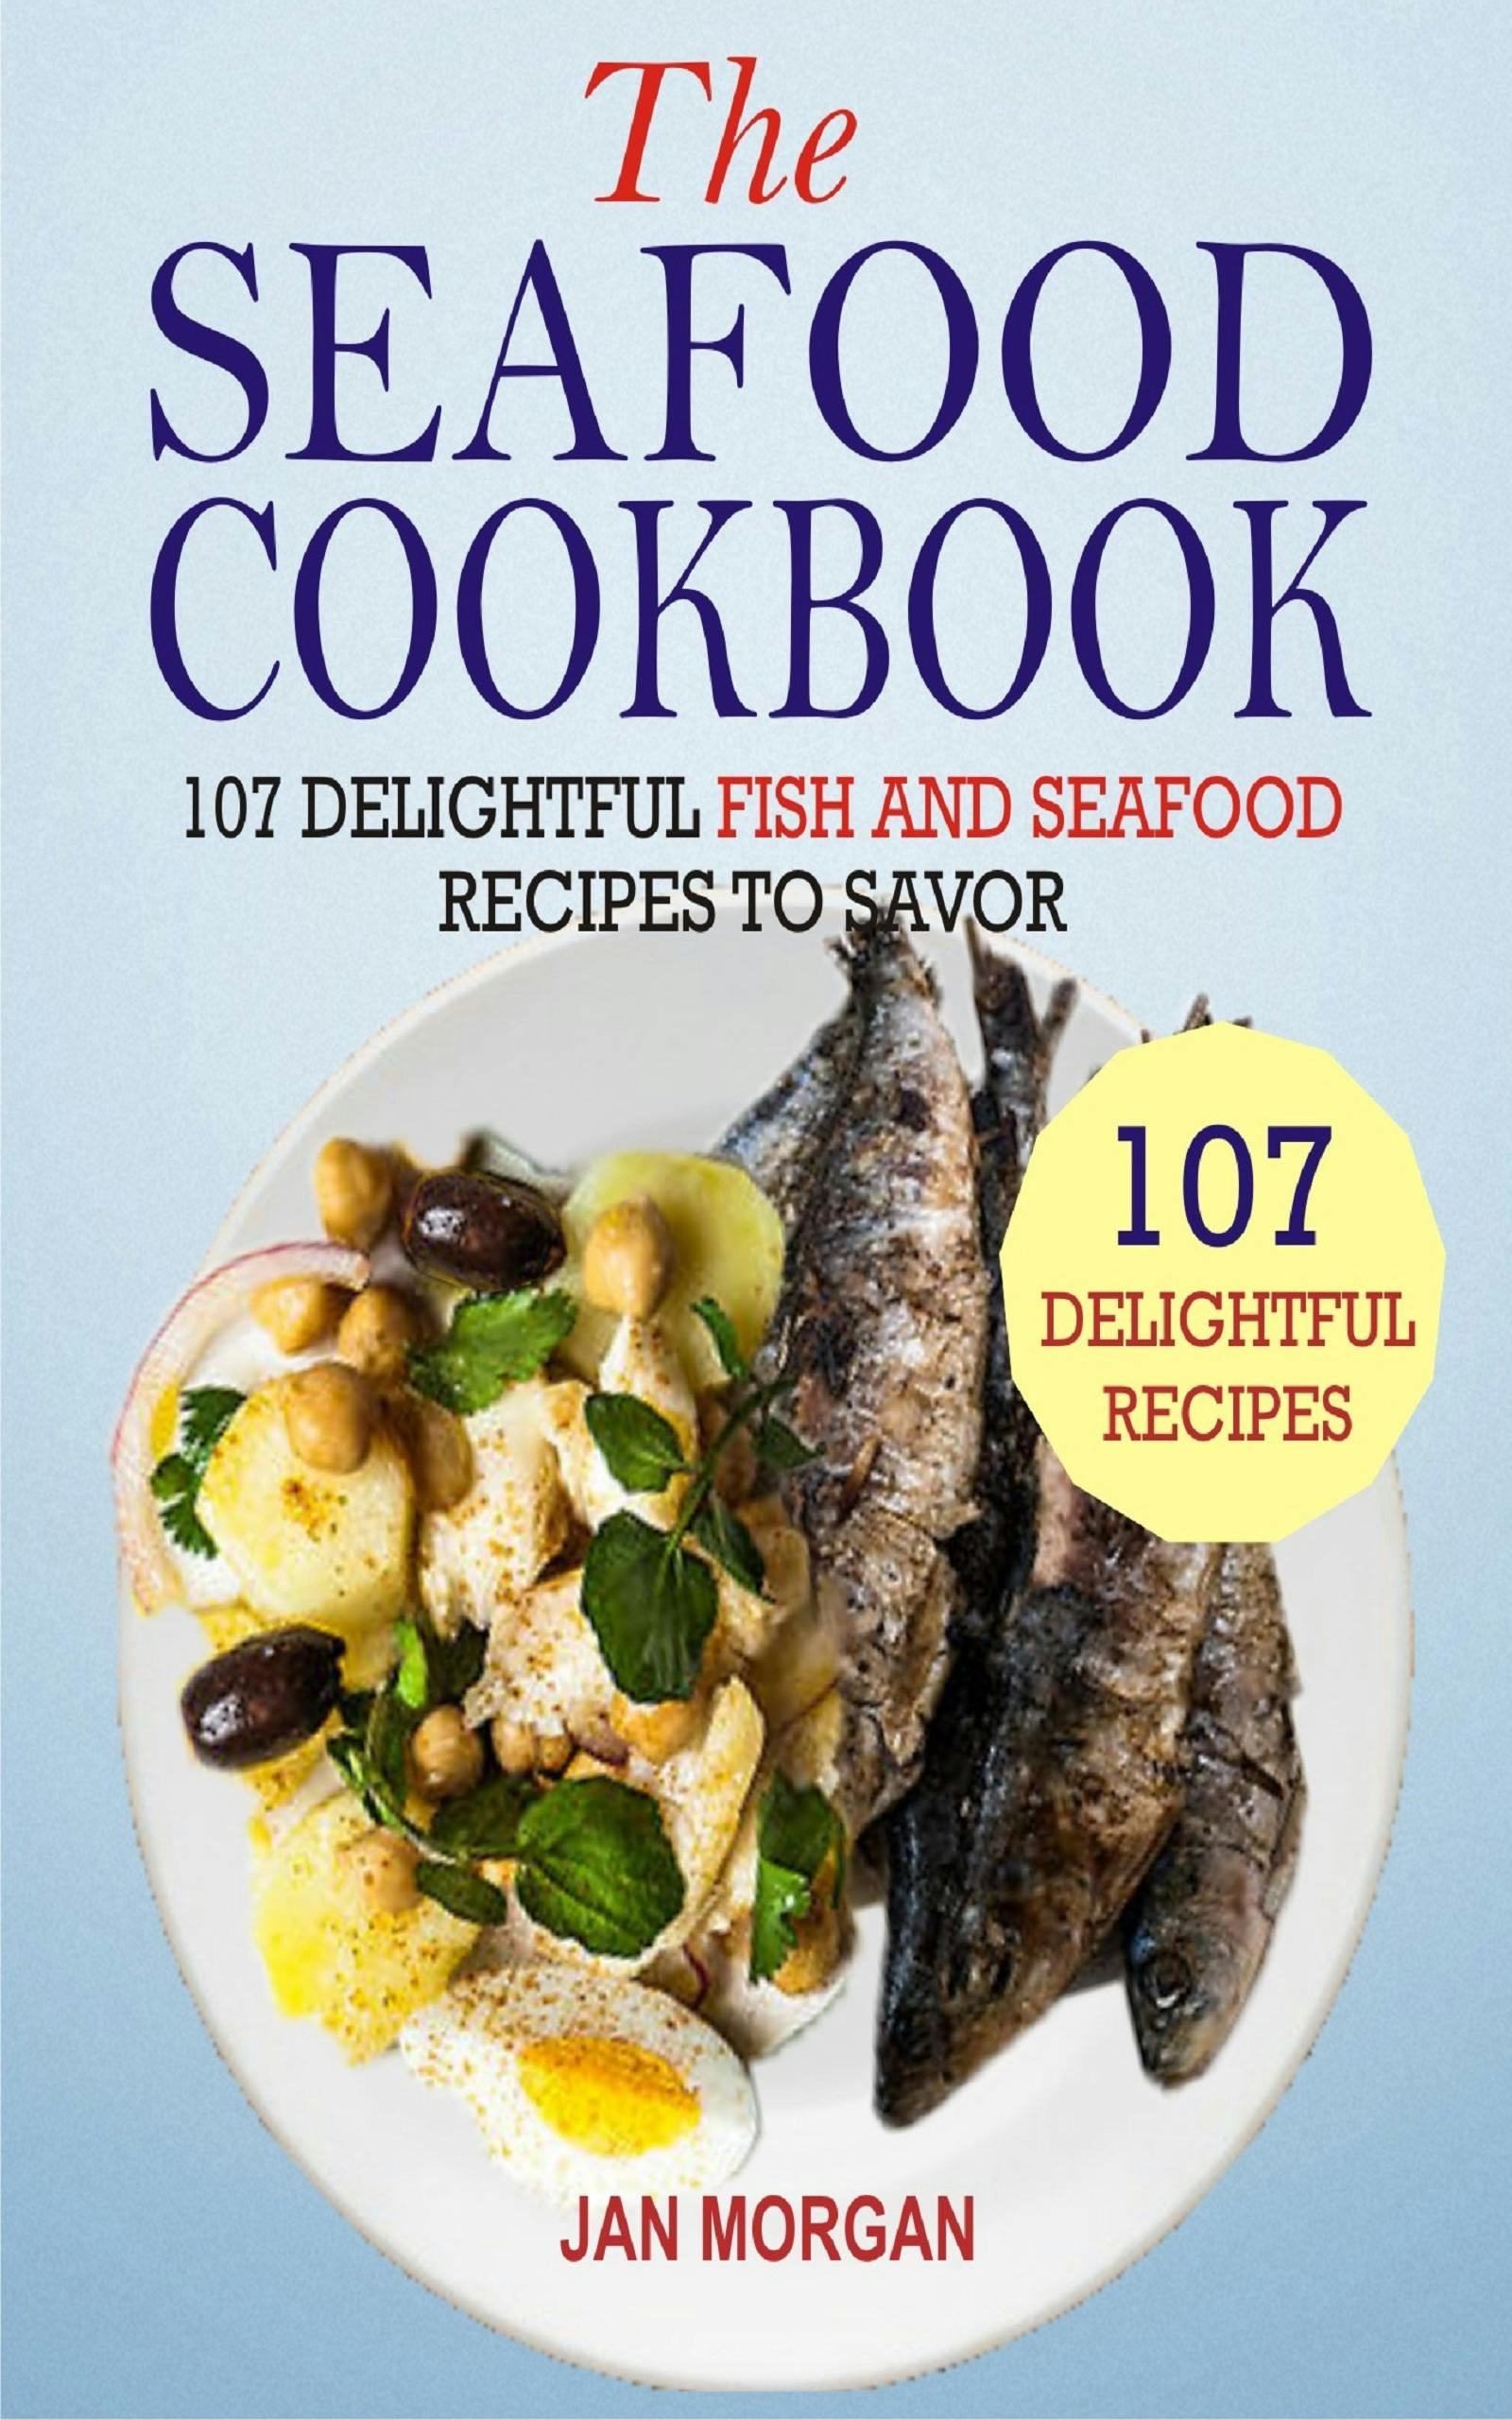 The Seafood Cookbook - undefined